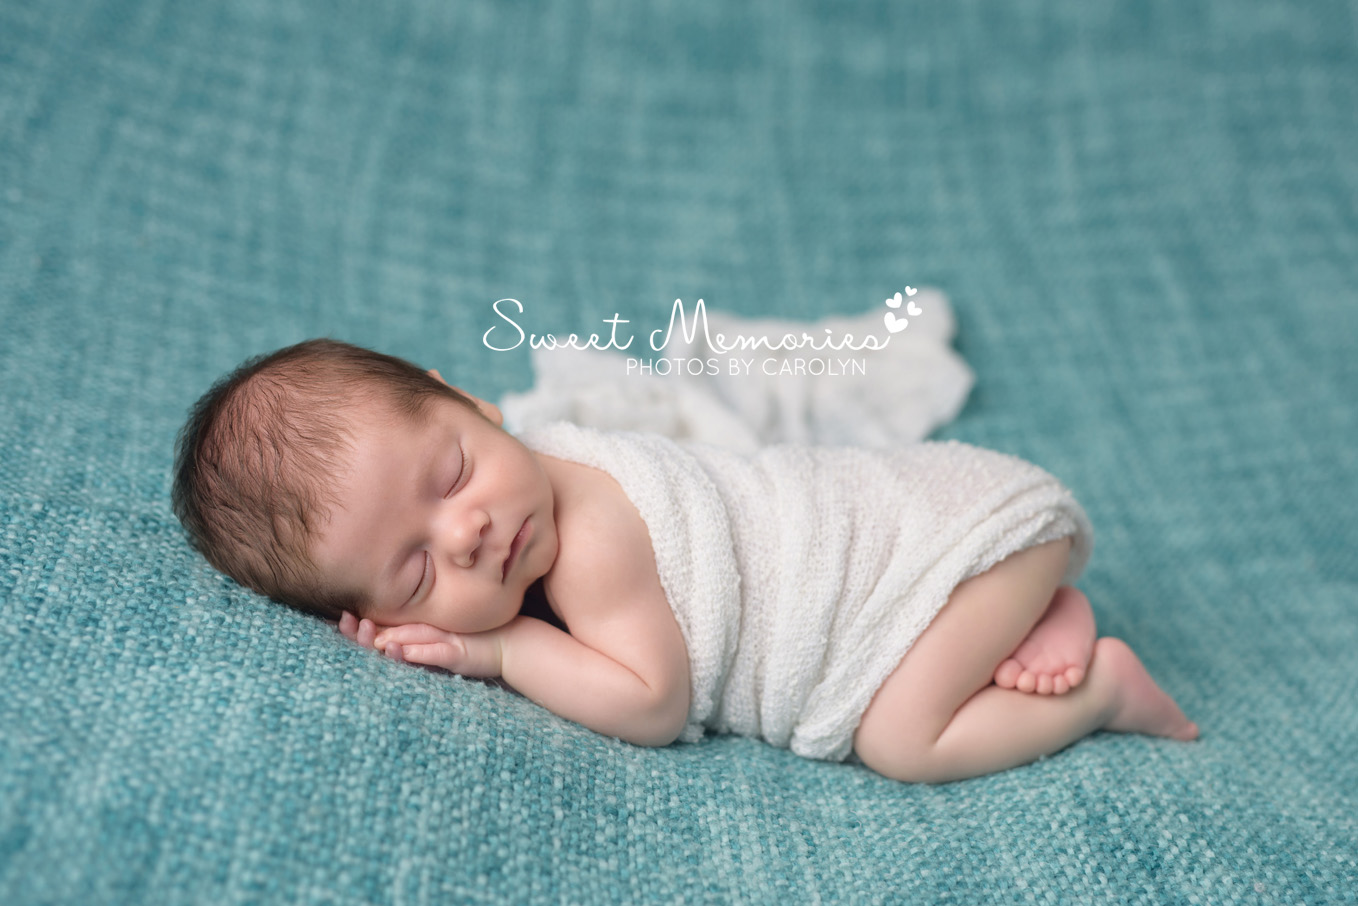 Sweet Memories Photos by Carolyn | Plymouth Meeting PA | Bucks County Montgomery County Newborn Infant Baby Photographer | newborn baby boy in white swaddle